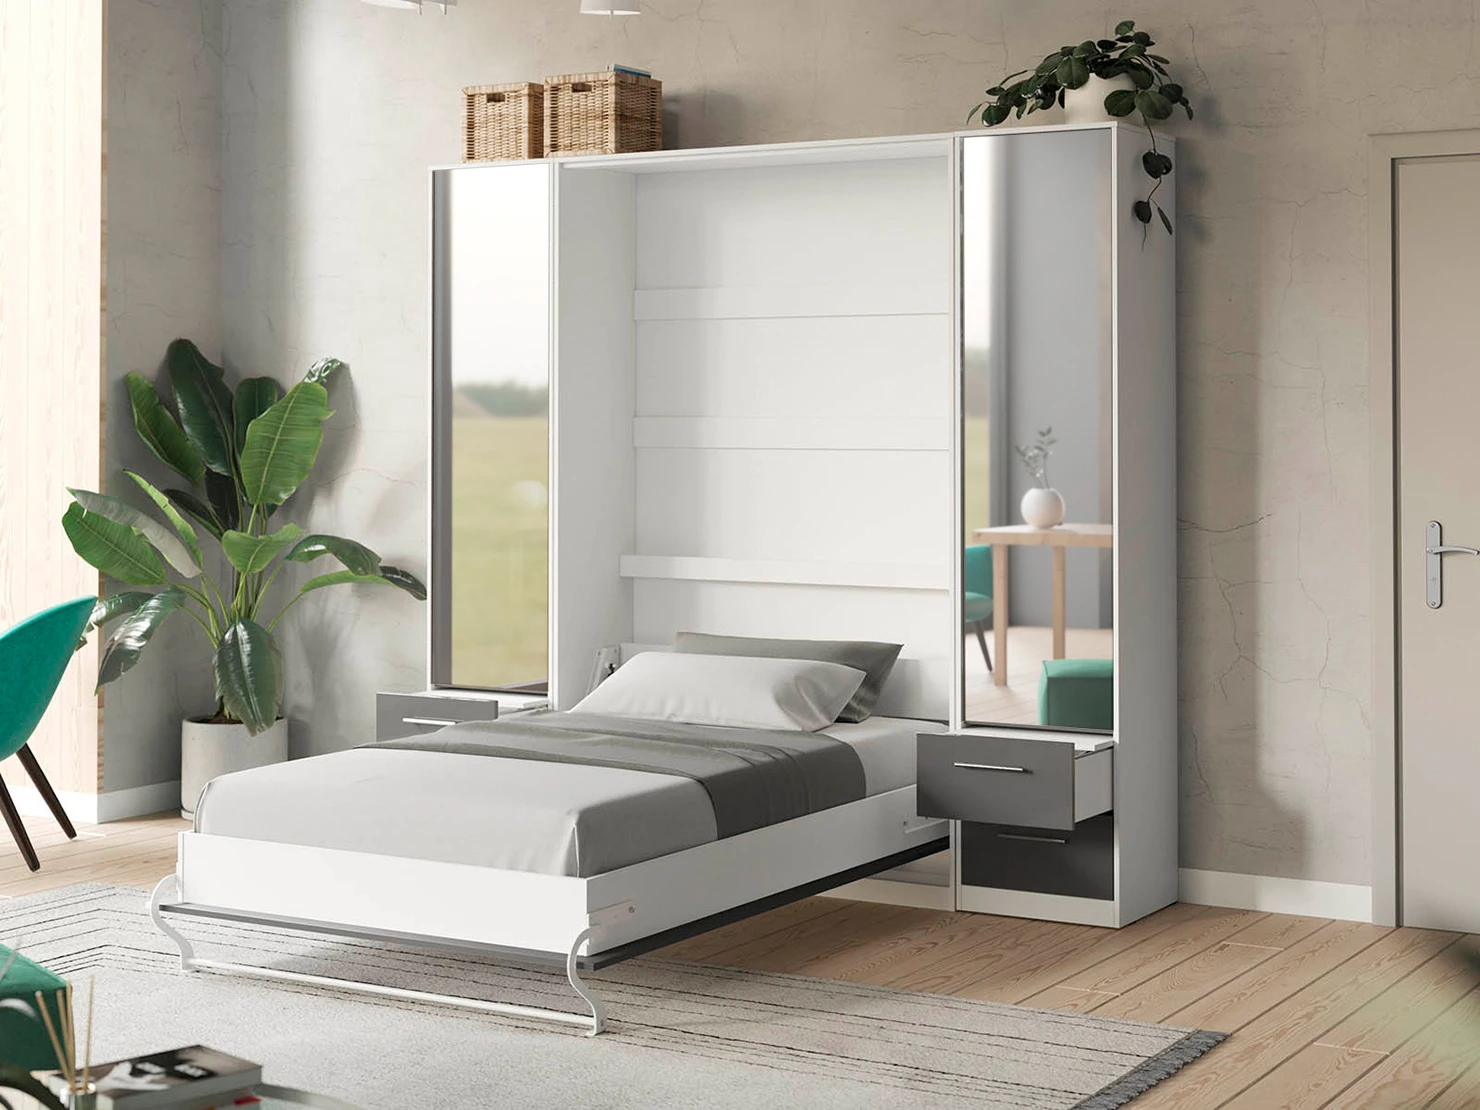 2 Murphy Bed SET 140x200cm Vertical + 2x Cabinets 50cm White/Anthracite Gloss with Mirror